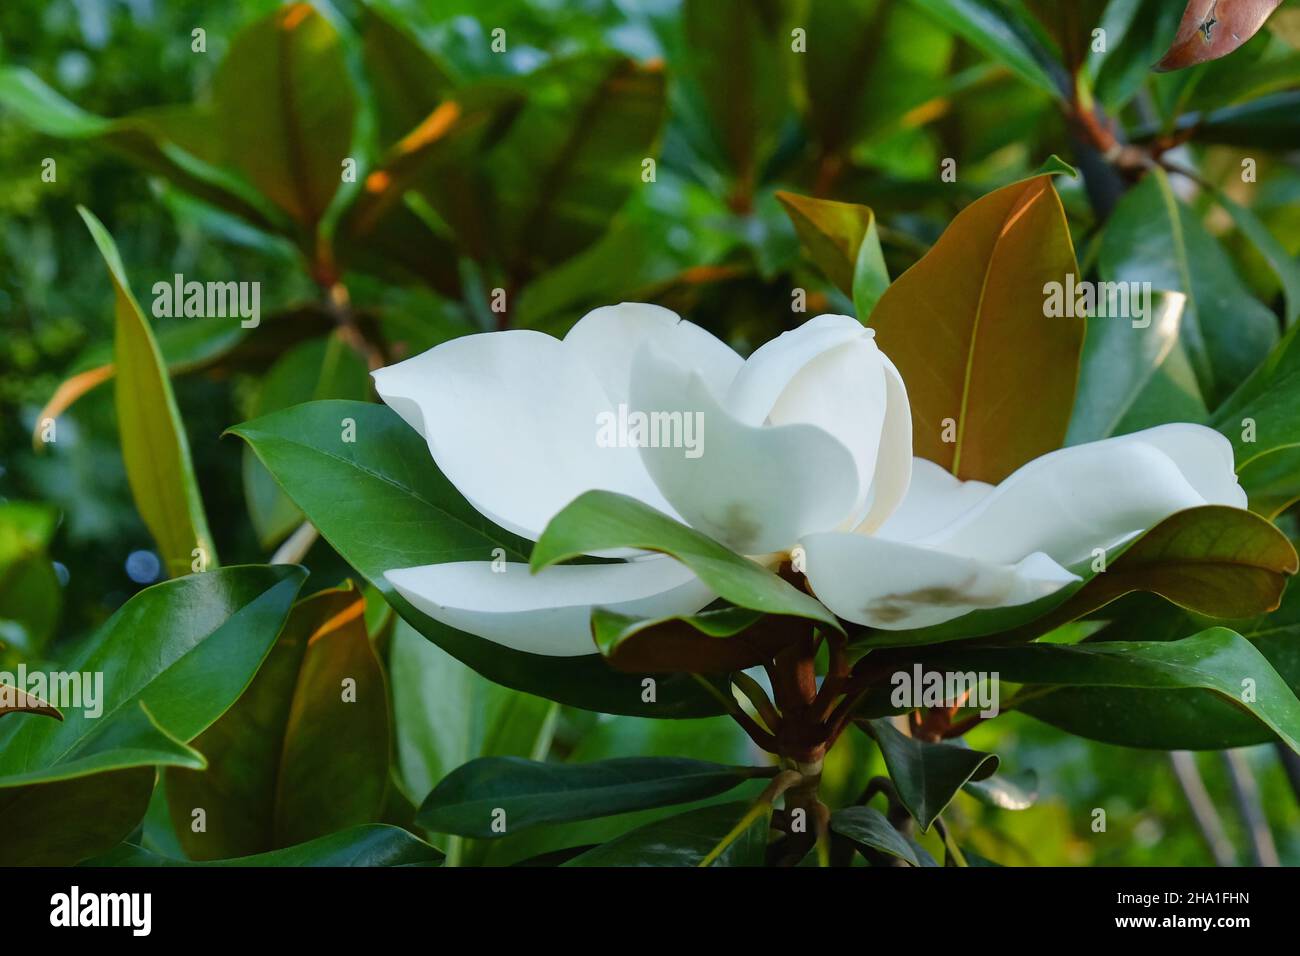 Evergreen ornamental tree, Southern Magnolia Grandiflora with amazing huge white creamy flower and large Stock Photo